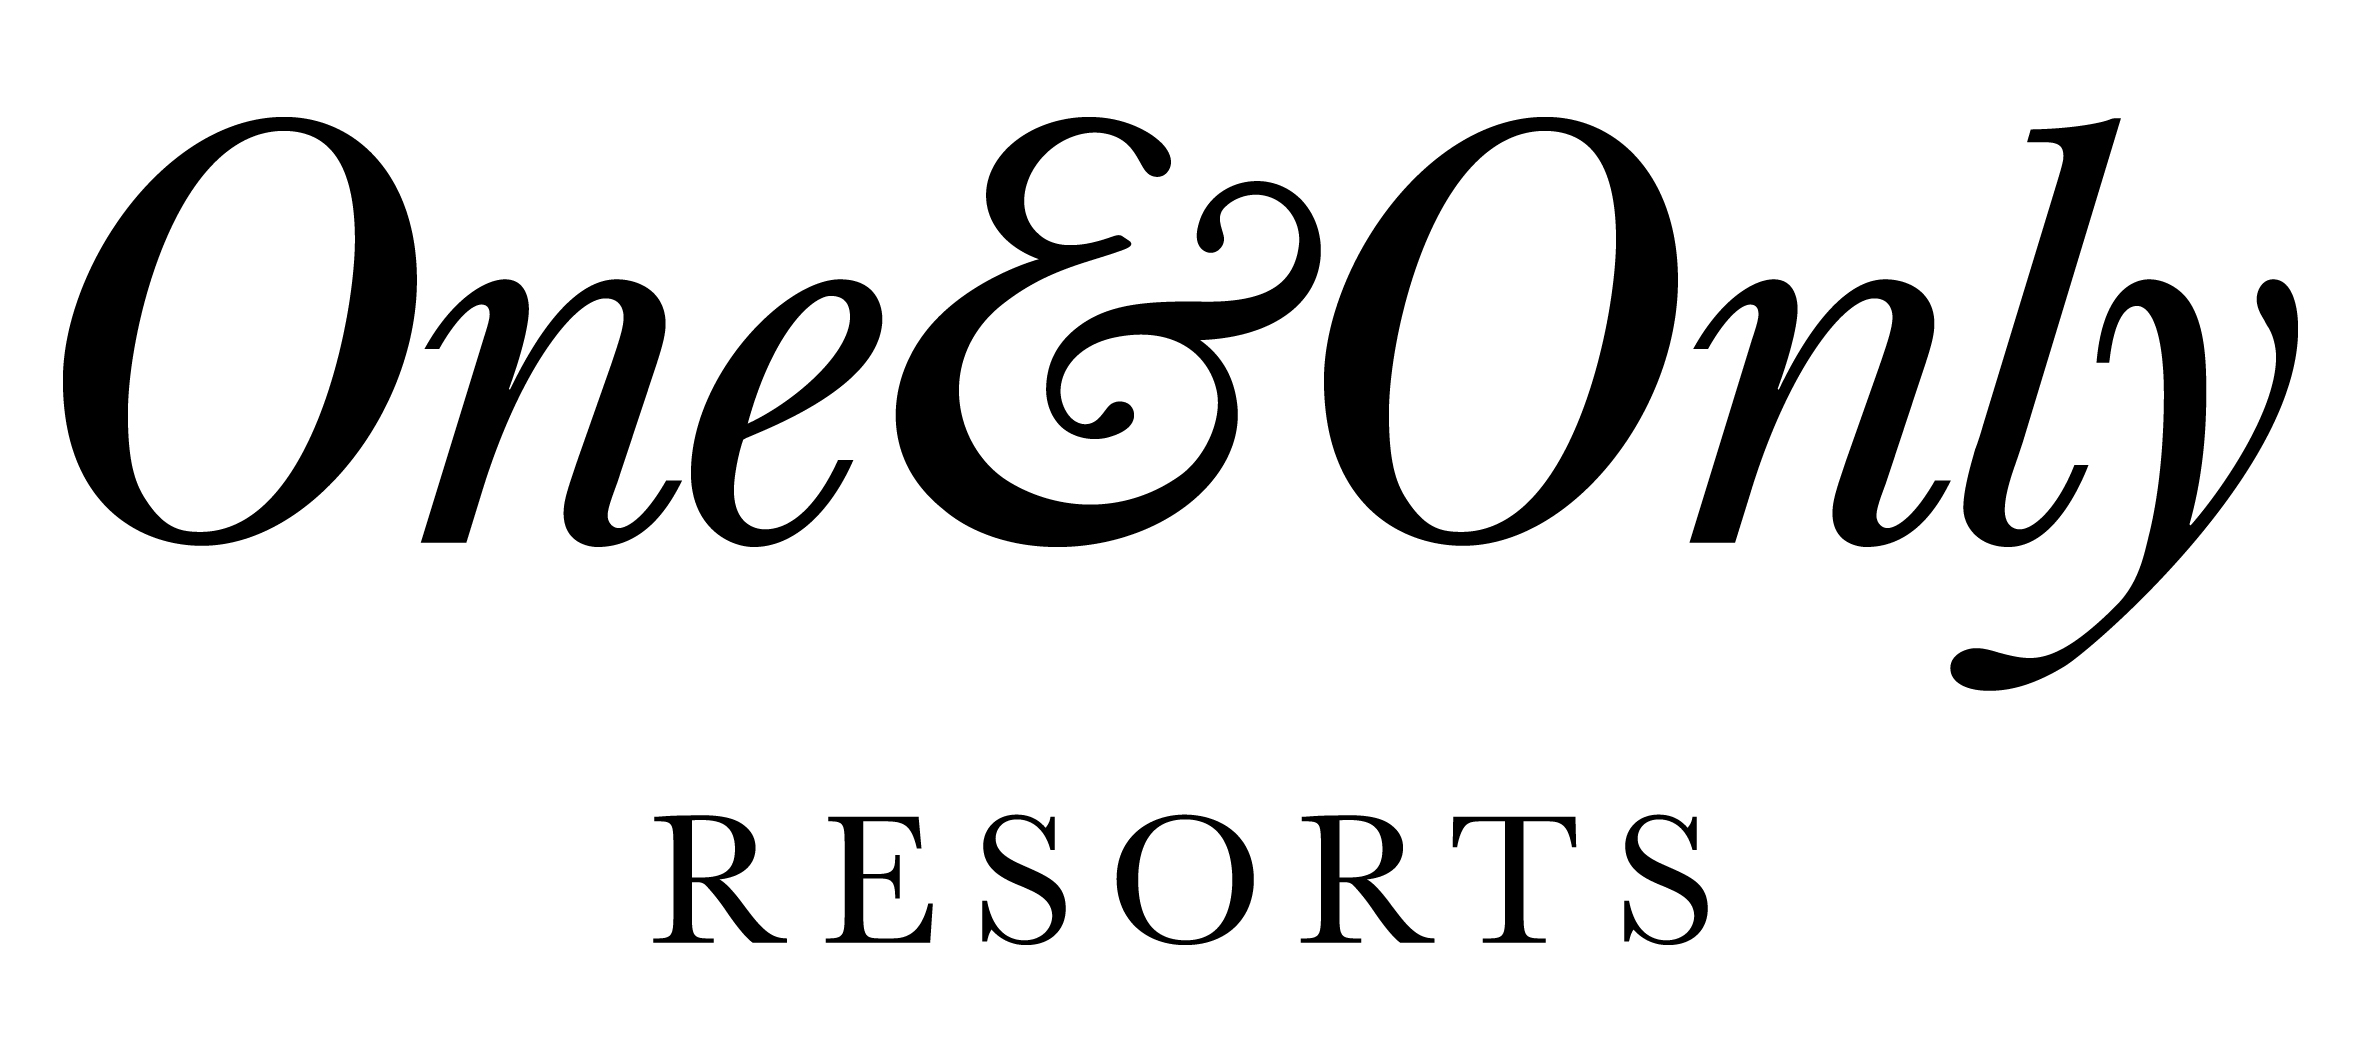 one-and-only-resorts-logo.jpg